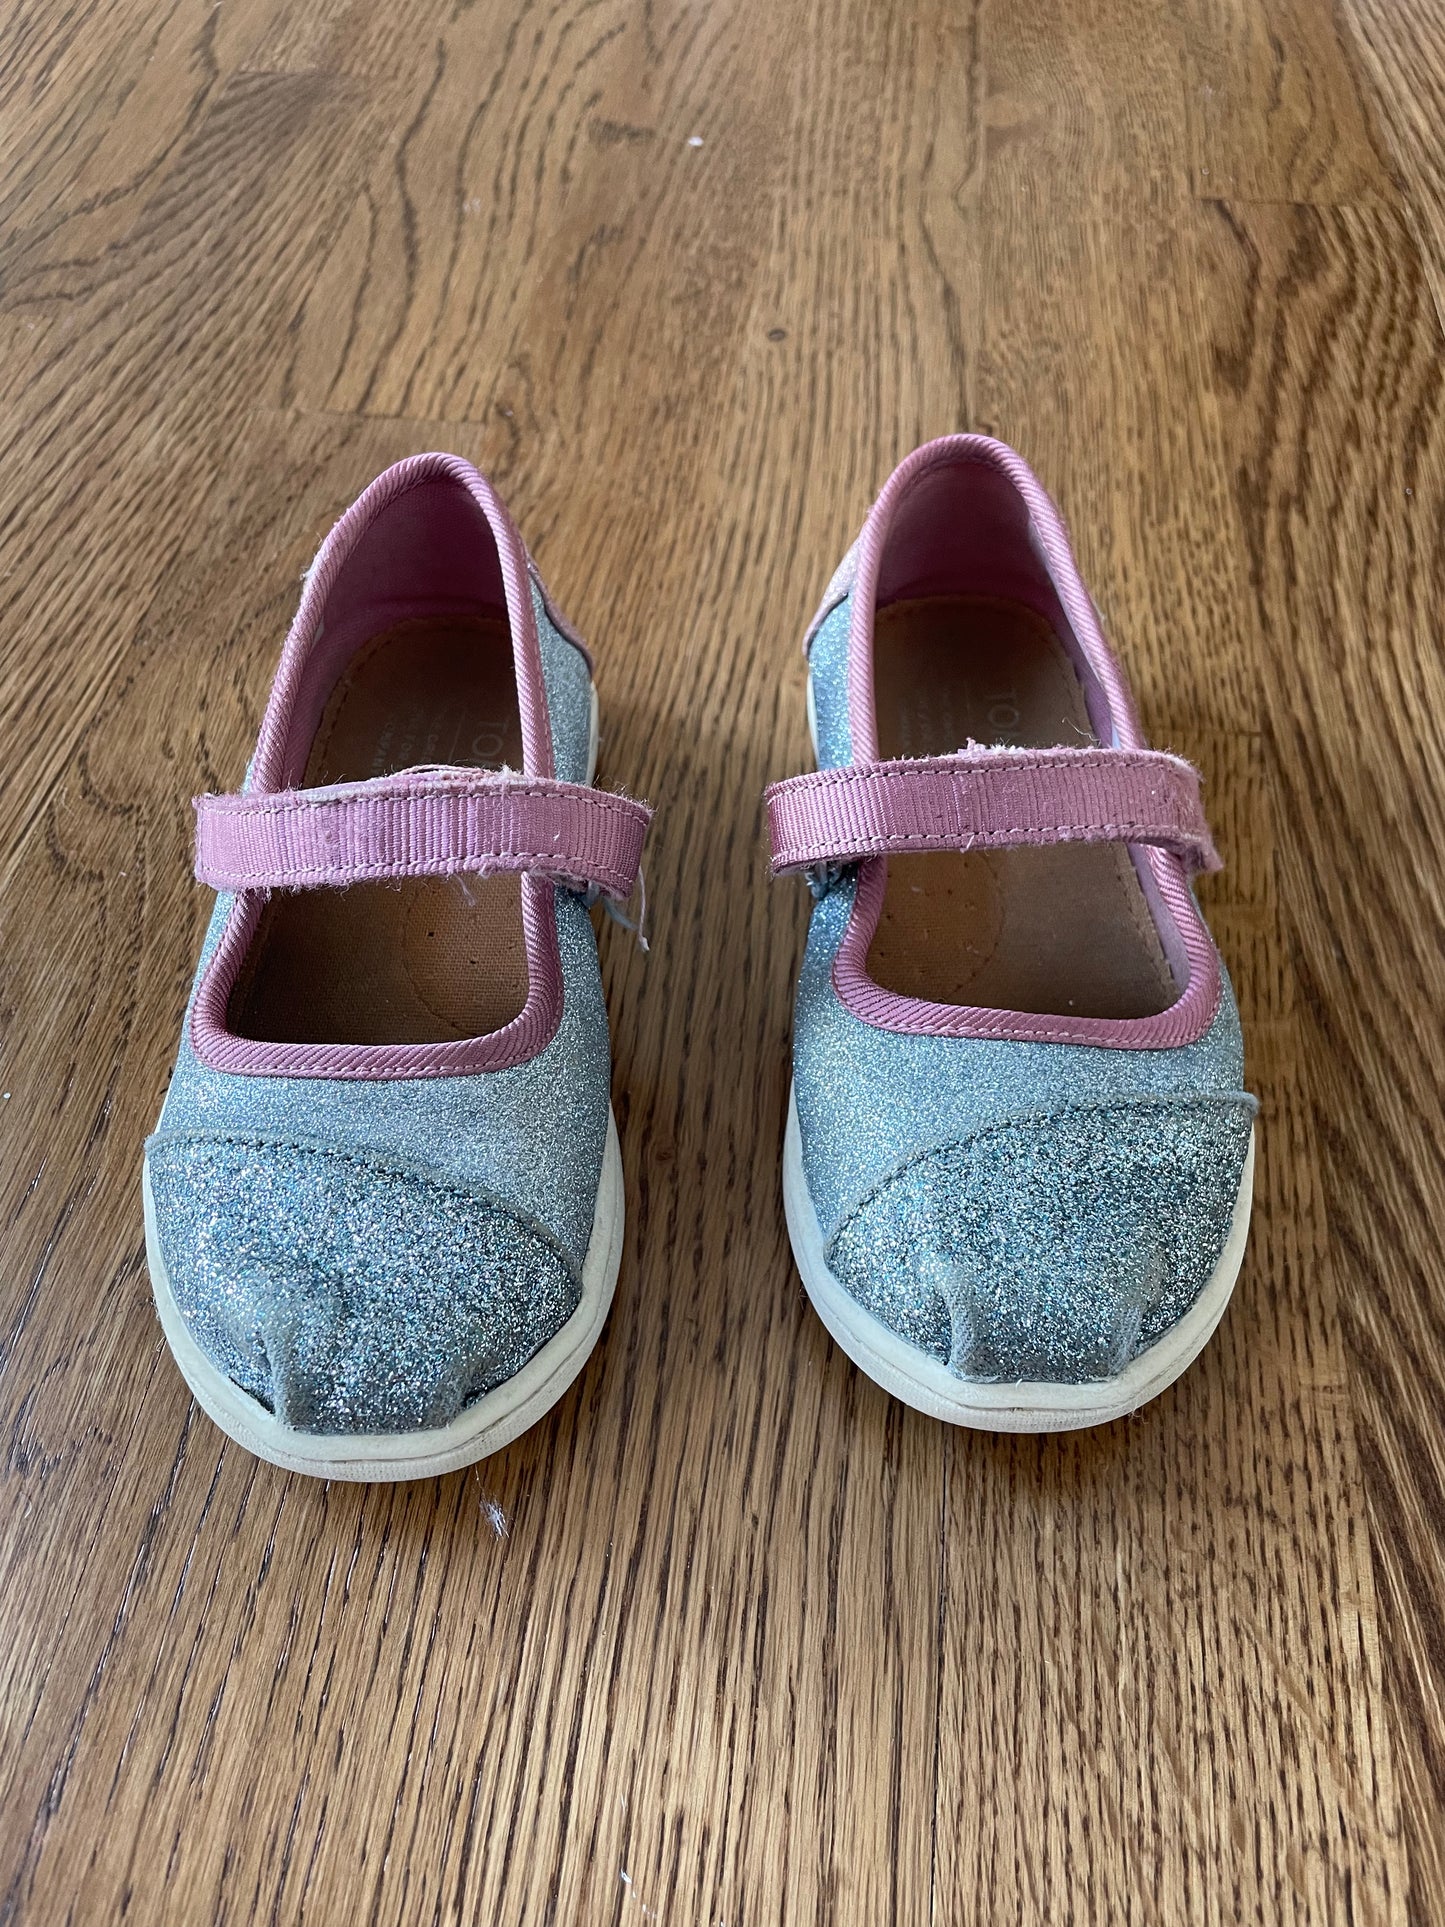 Toms Girls Blue Glitter/Pink Mary Jane shoe toddler size 8